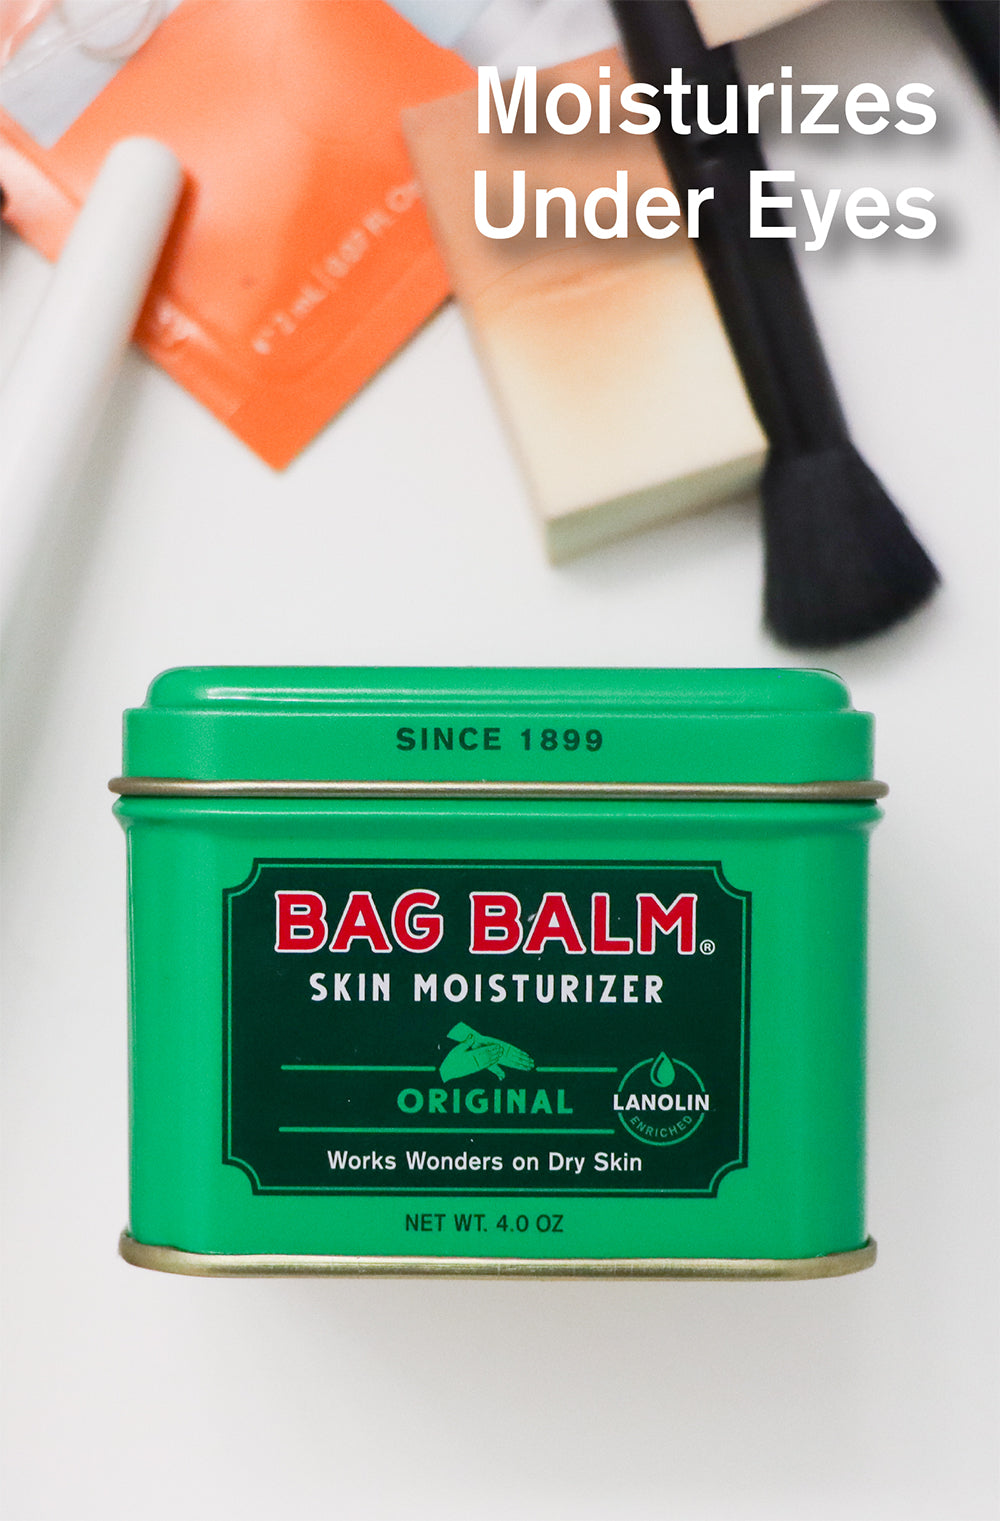  Bag Balm Vermont's Original Ointment, 1 Ounce Tin (Pack of 4),  Moisturizing Ointment for Dry Skin that can Crack Split or Chafe on Hands  Feet Elbows Knees Shoulders and More 